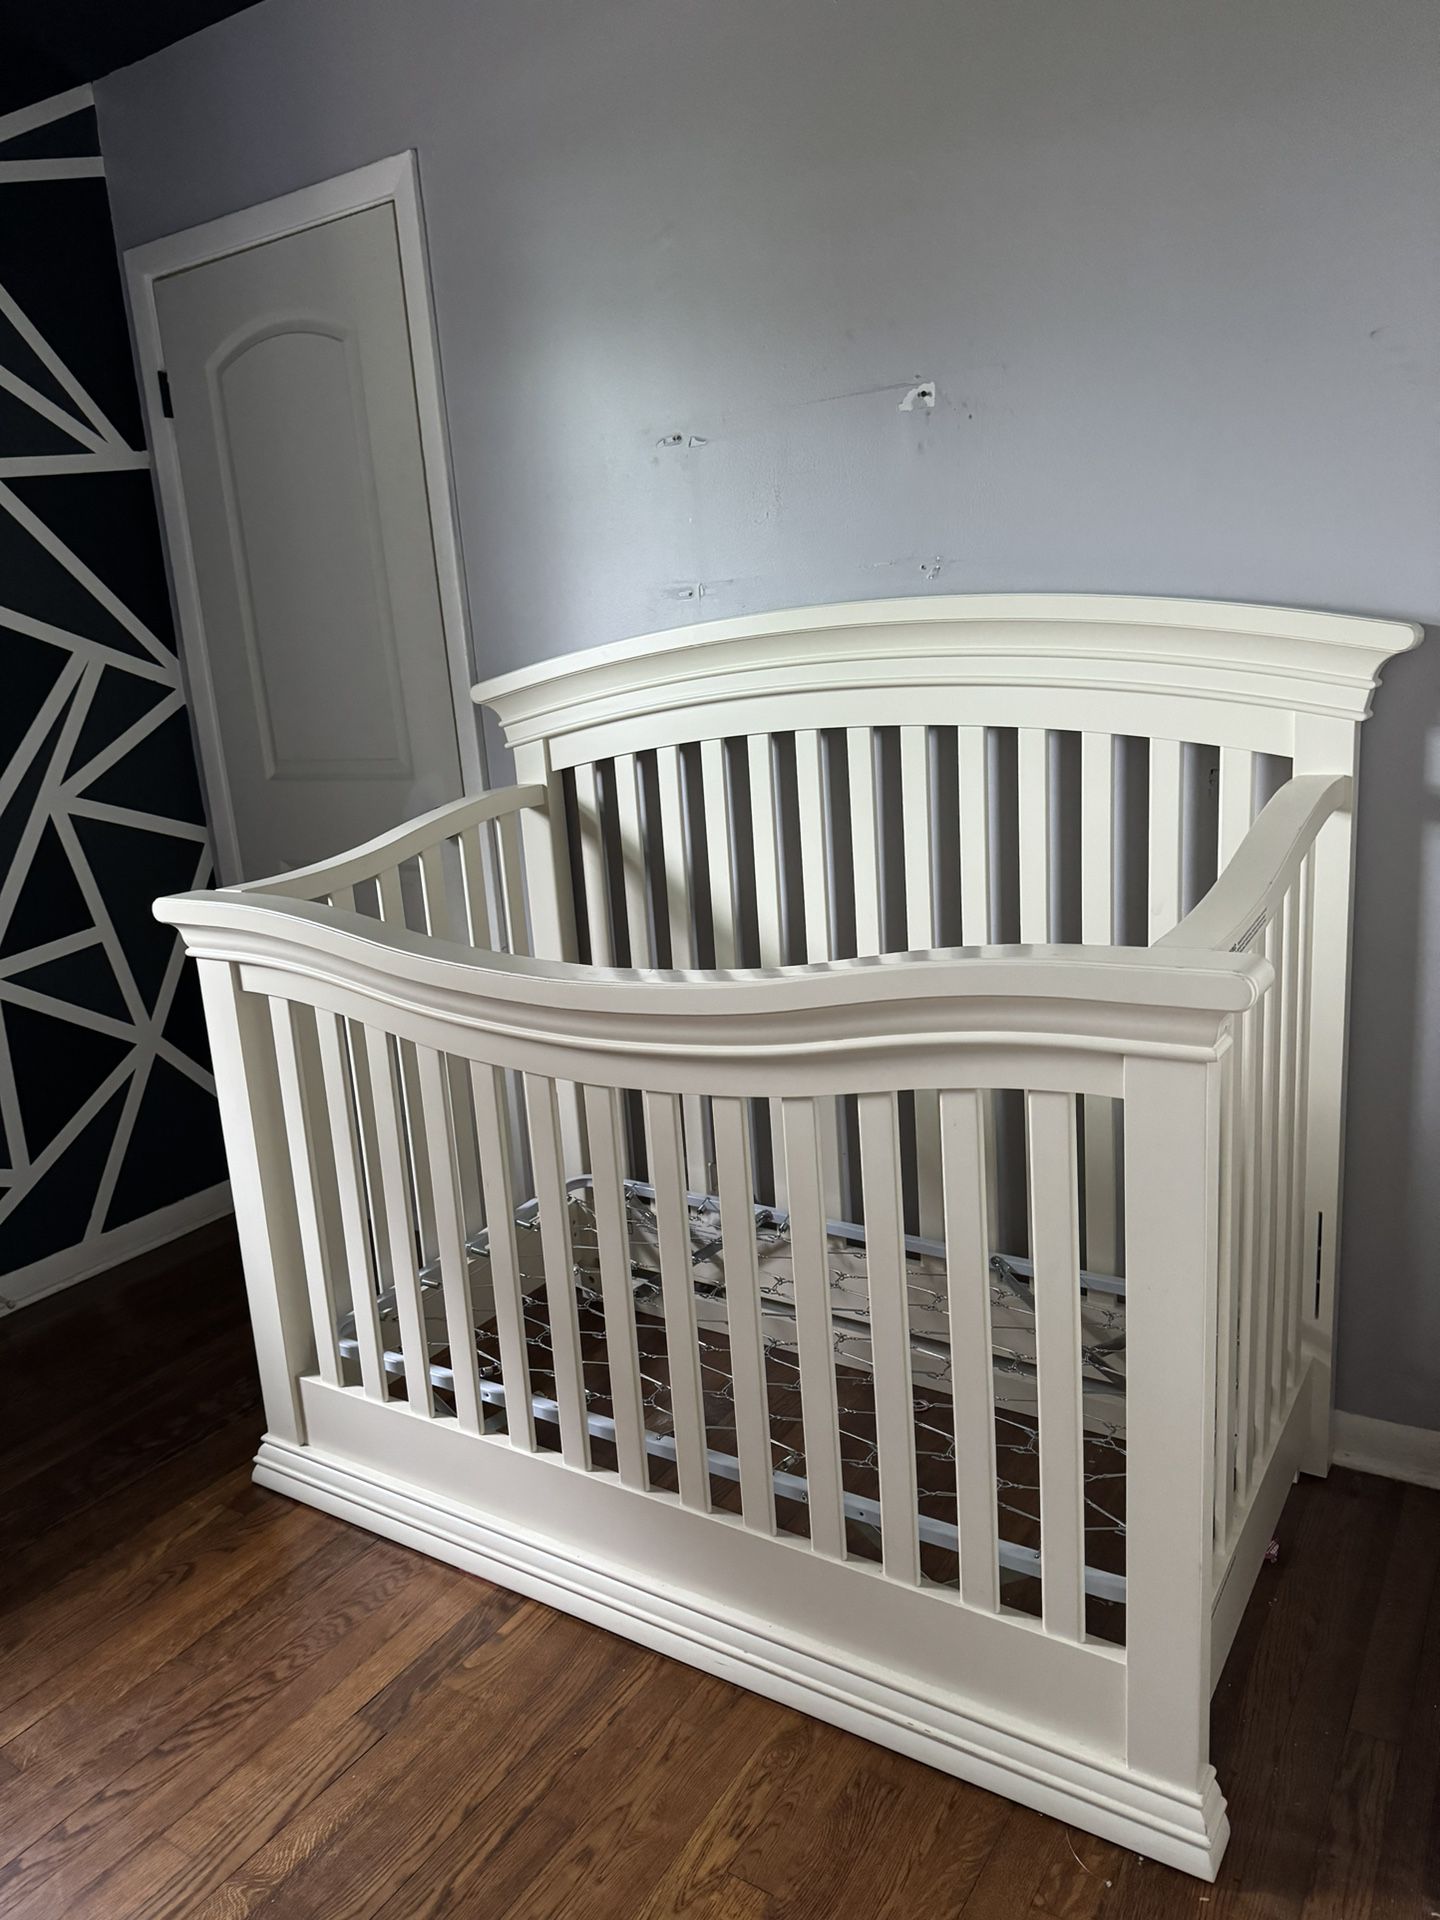 WHITE CRIB MATTERS INCLUDED 